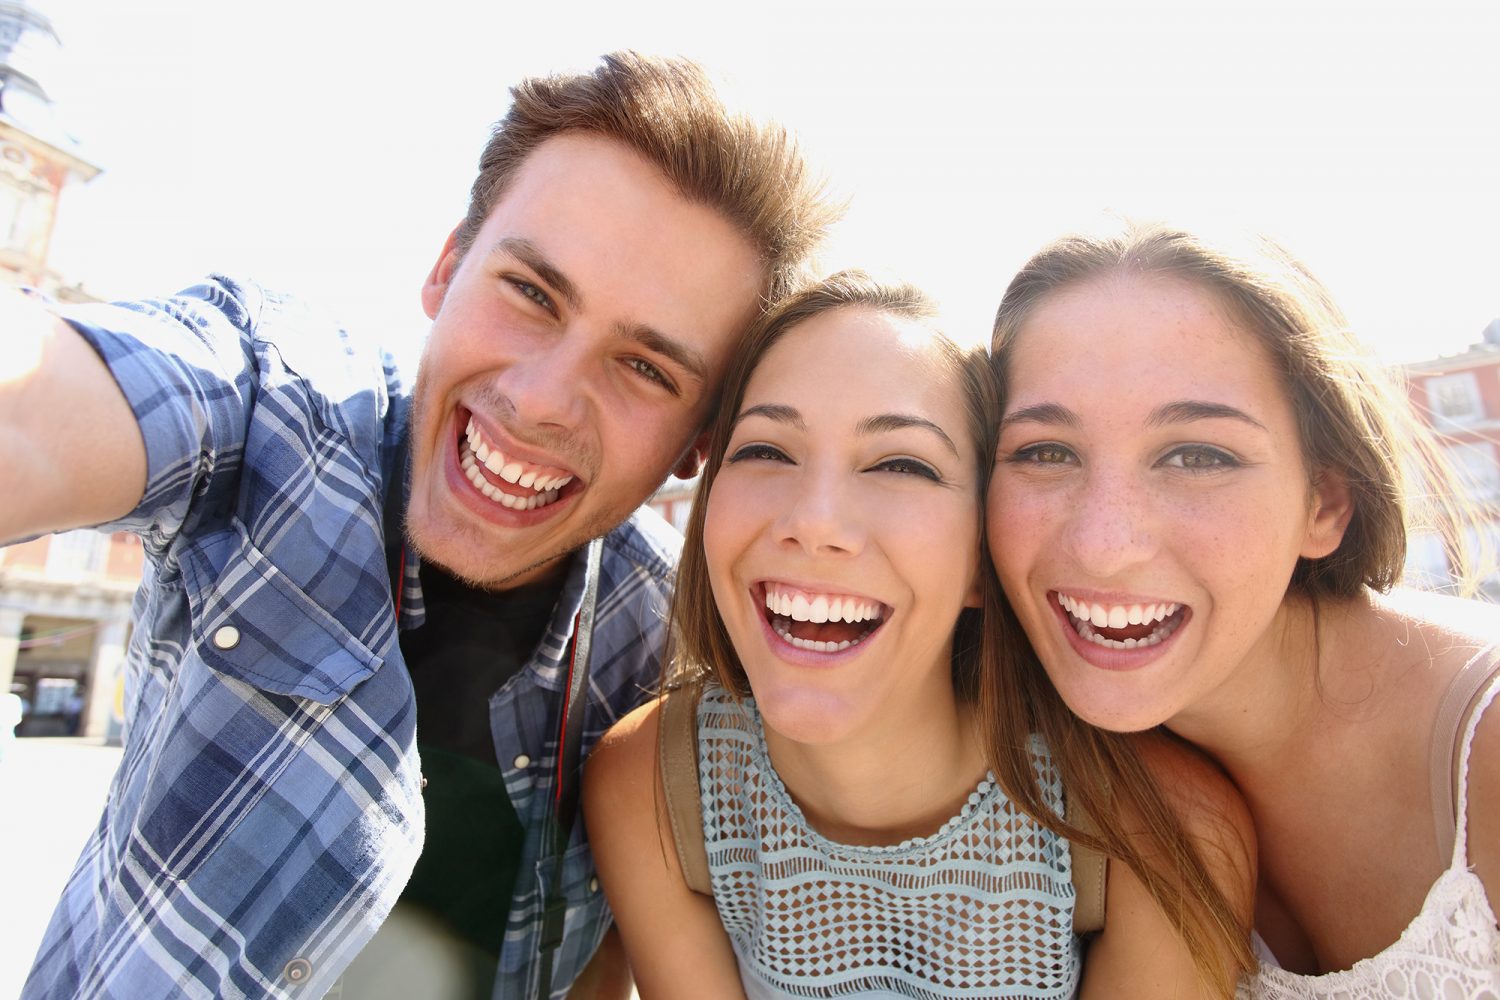 Orthodontic Treatment Made Affordable in Salt Lake City